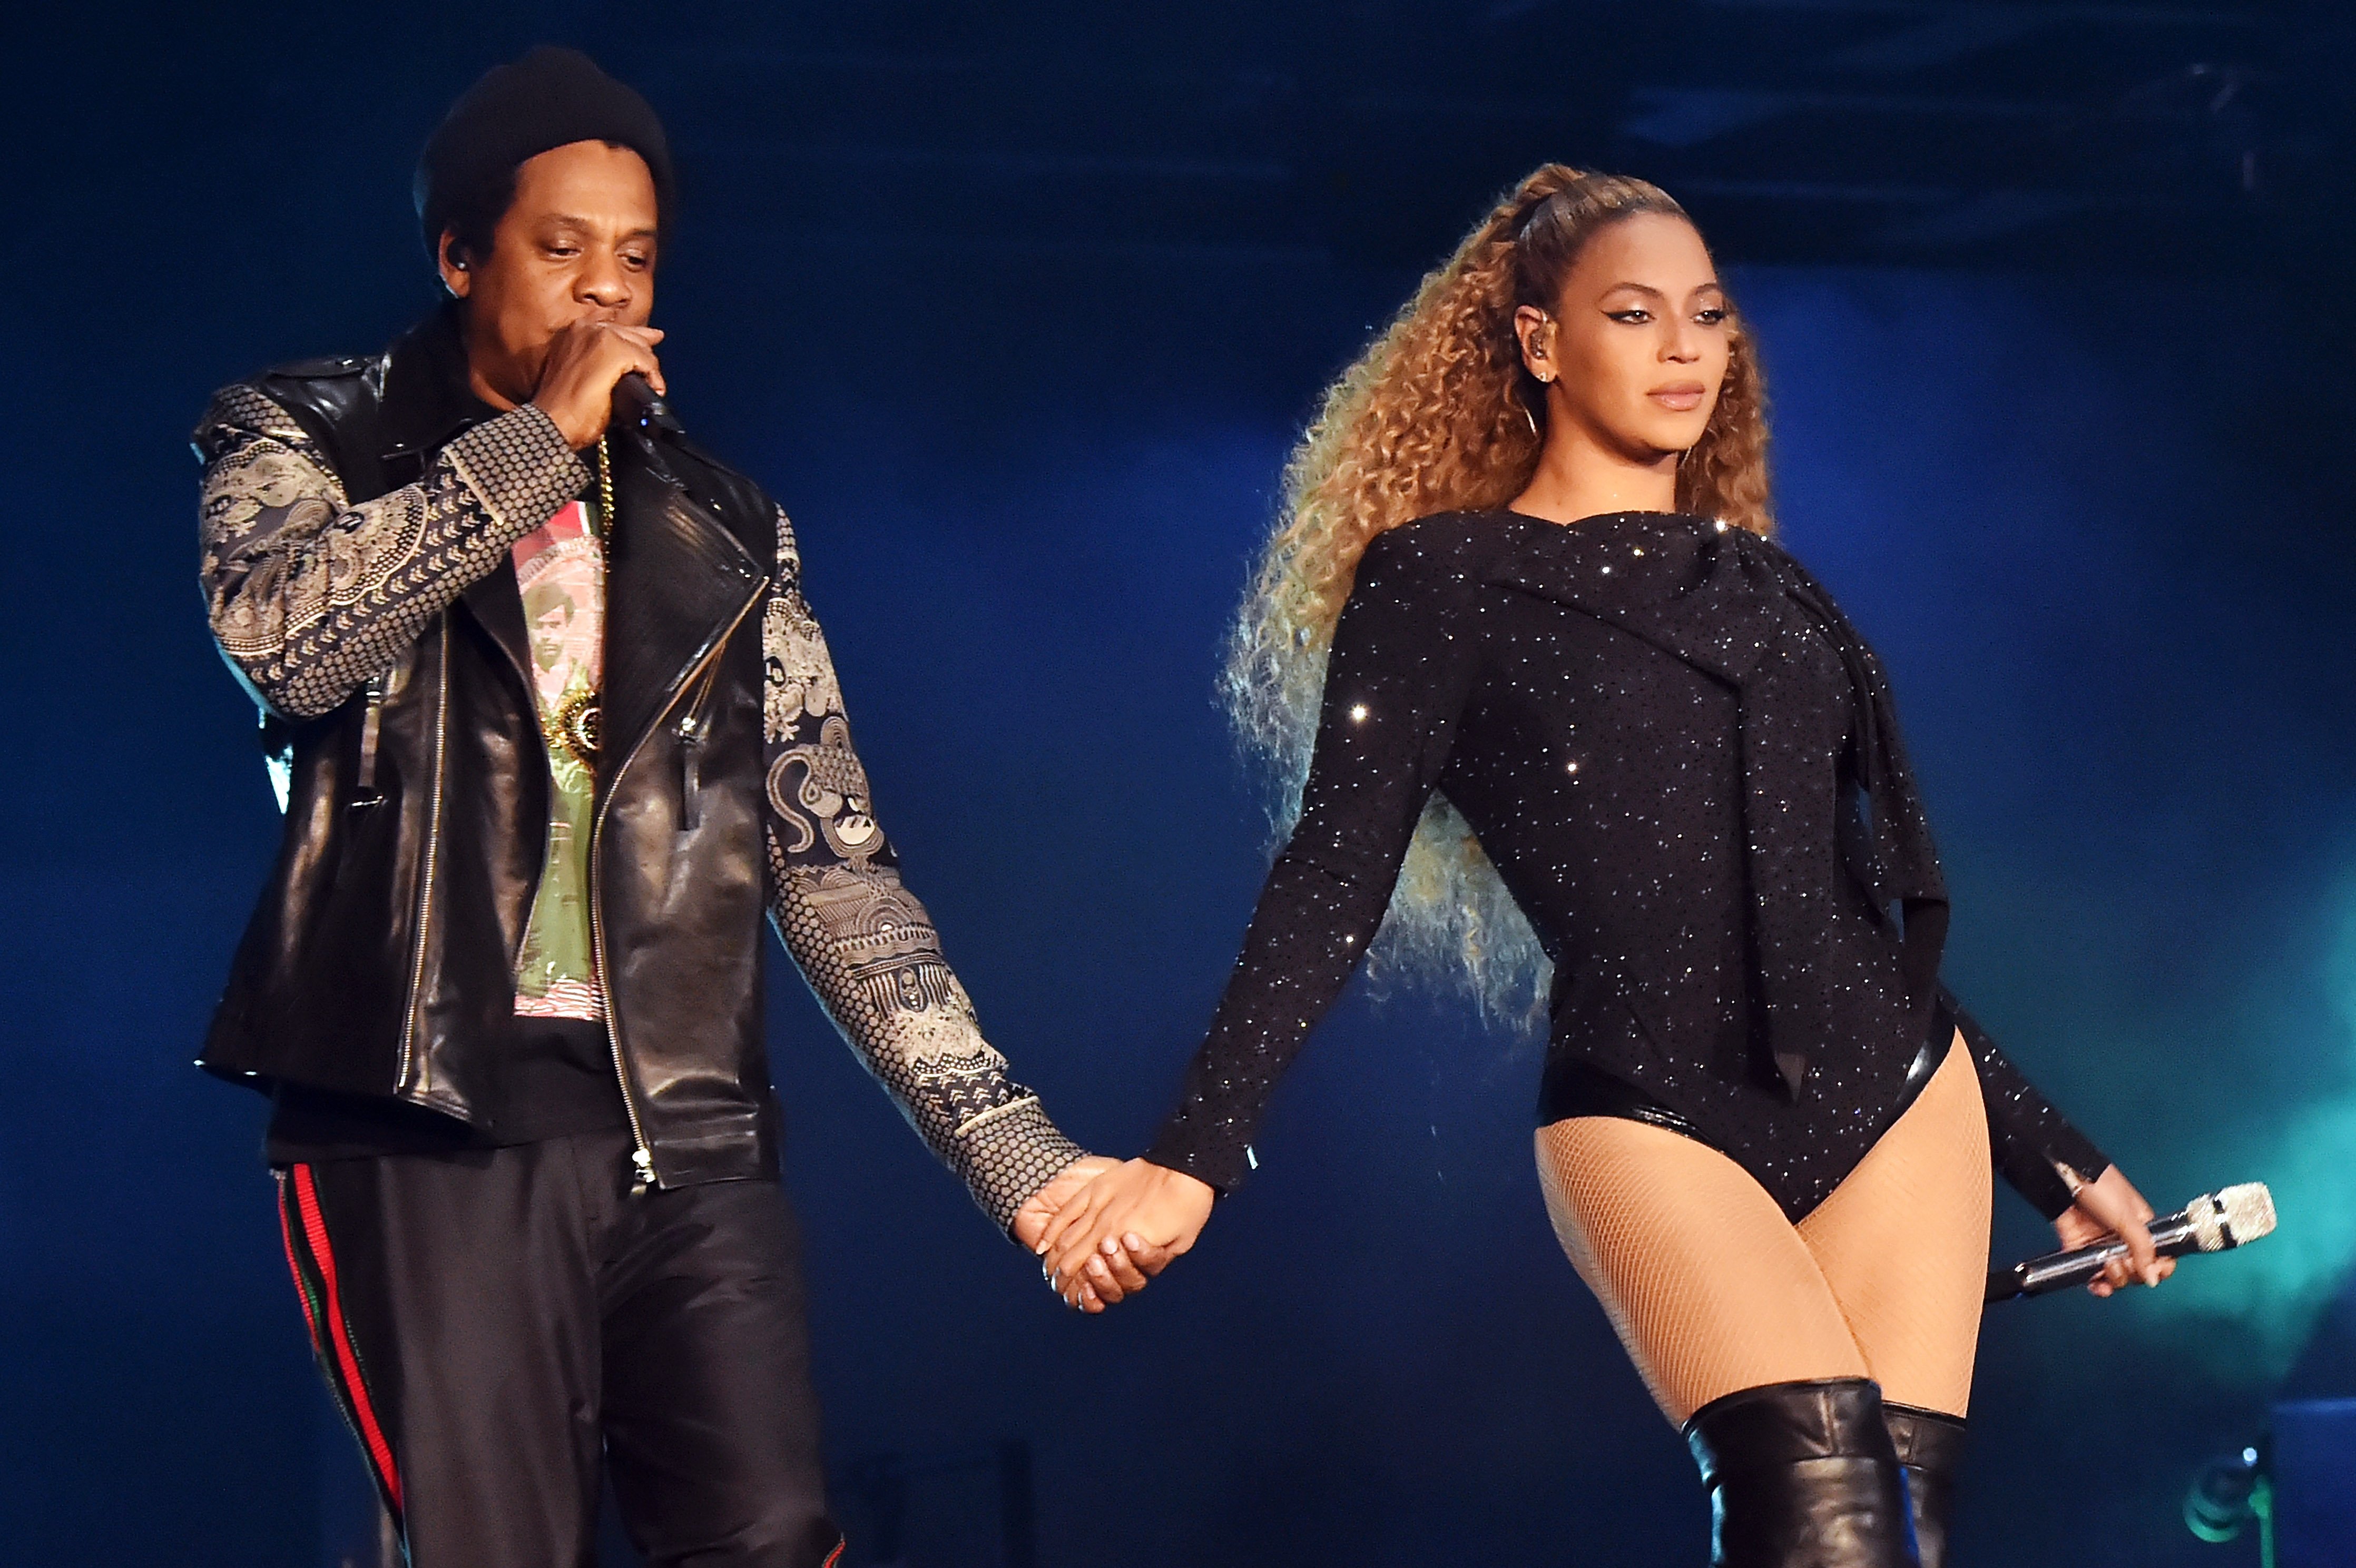 Beyoncé and Jay-Z’s Malibu Mansion Is the Most Expensive Property Purchase in California History